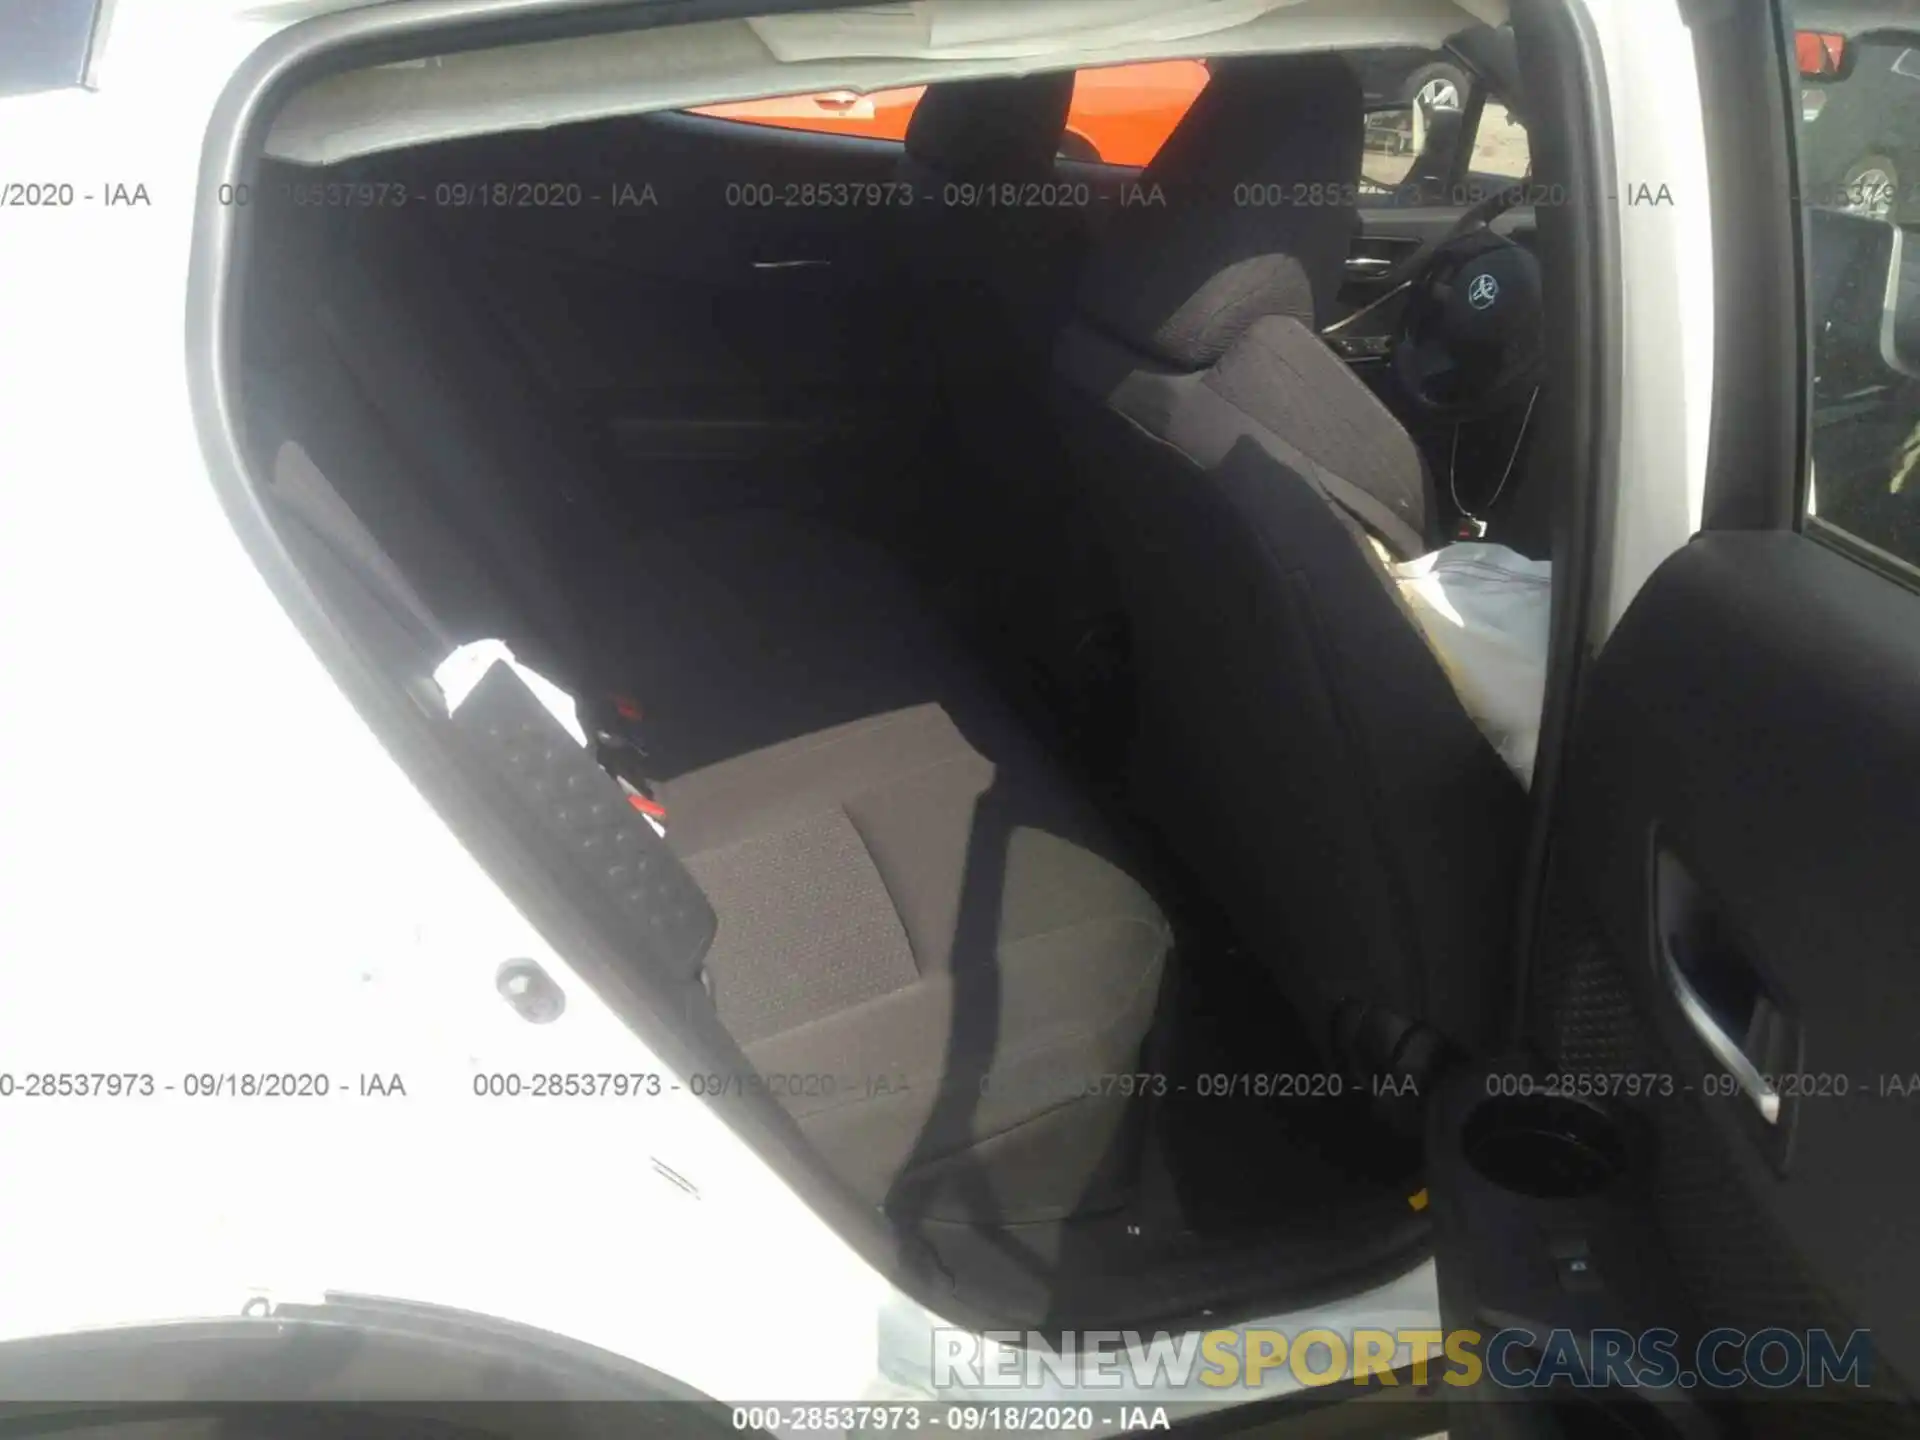 8 Photograph of a damaged car NMTKHMBXXKR085298 TOYOTA C-HR 2019